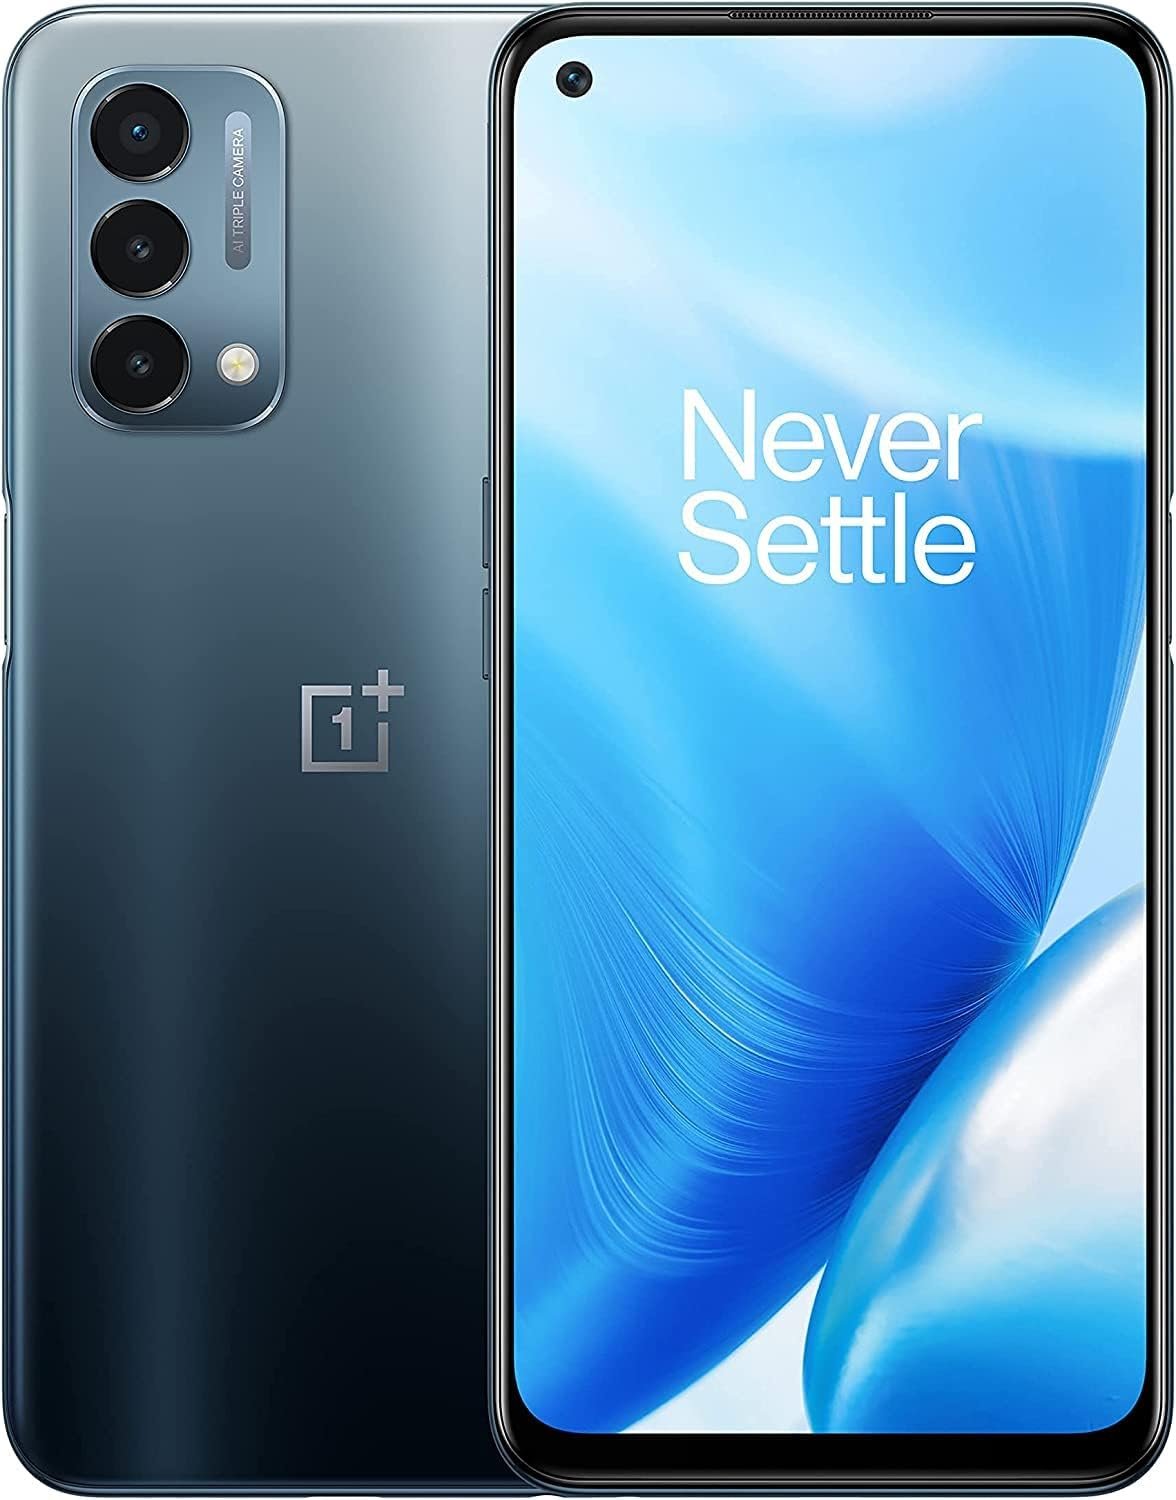 OnePlus Nord N200: A Budget-friendly 5G Smartphone with Impressive Features